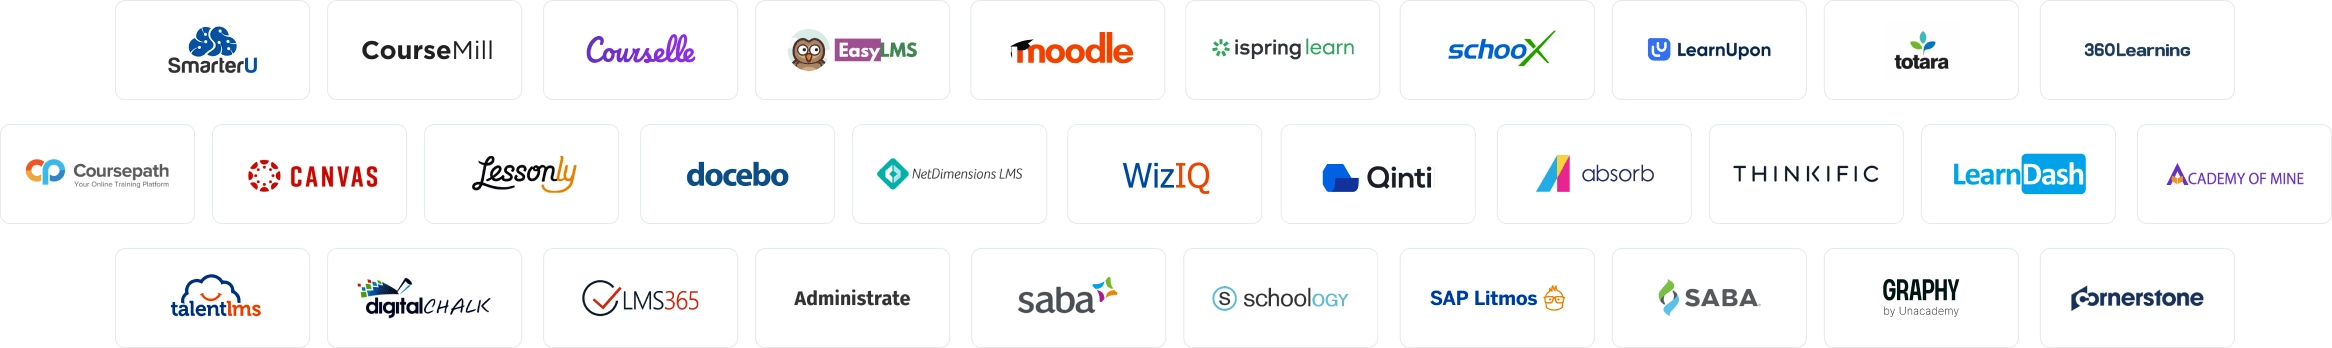 iSpring supported LMSs